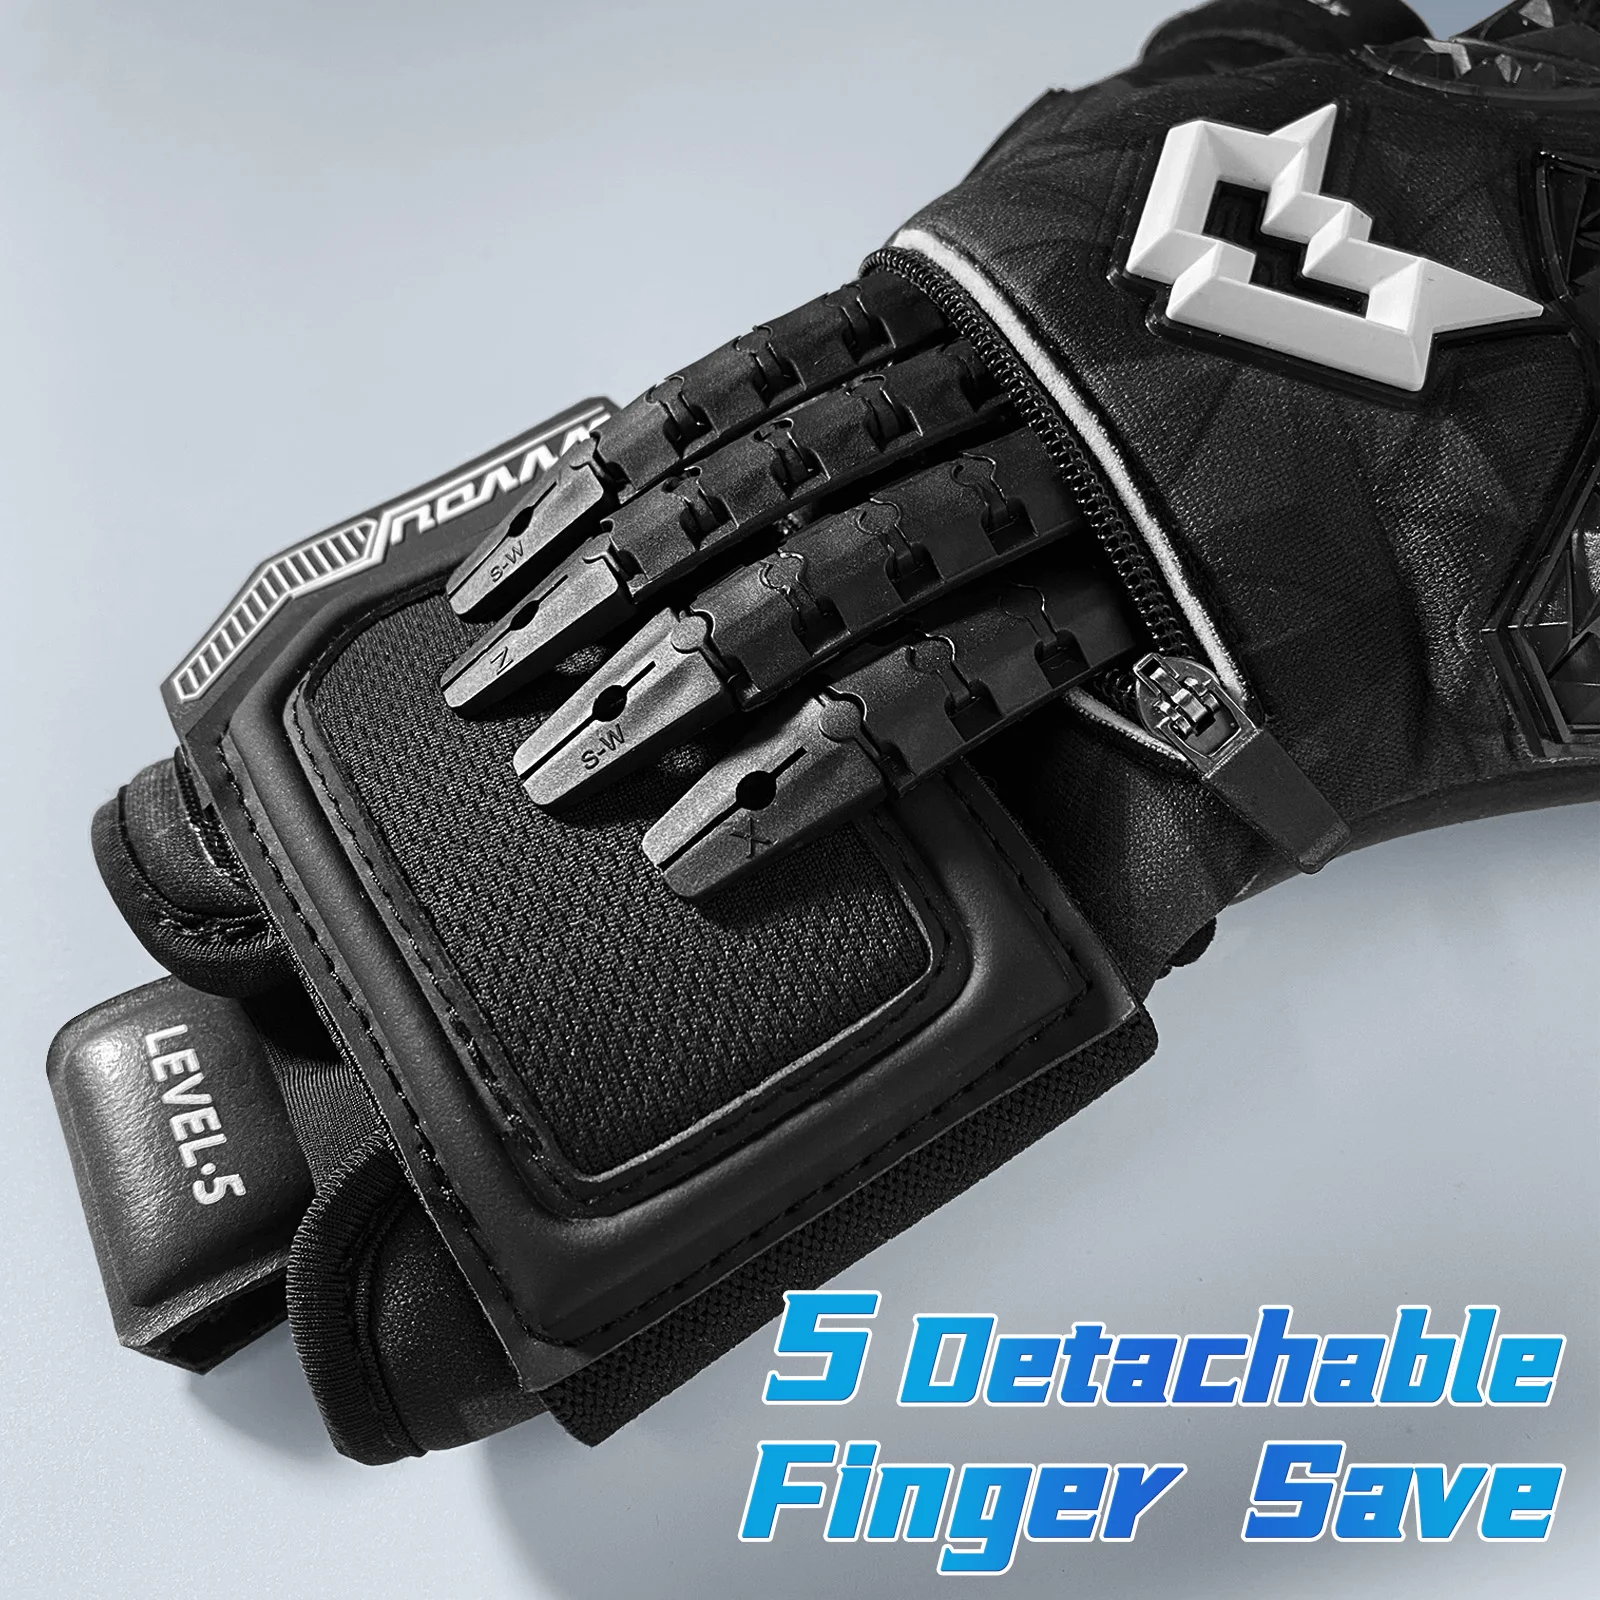 WVVOU Soccer Goalie Gloves for Adults and Youth, High Performance Goalkeeper Gloves with 5 Detachable Finger Saves